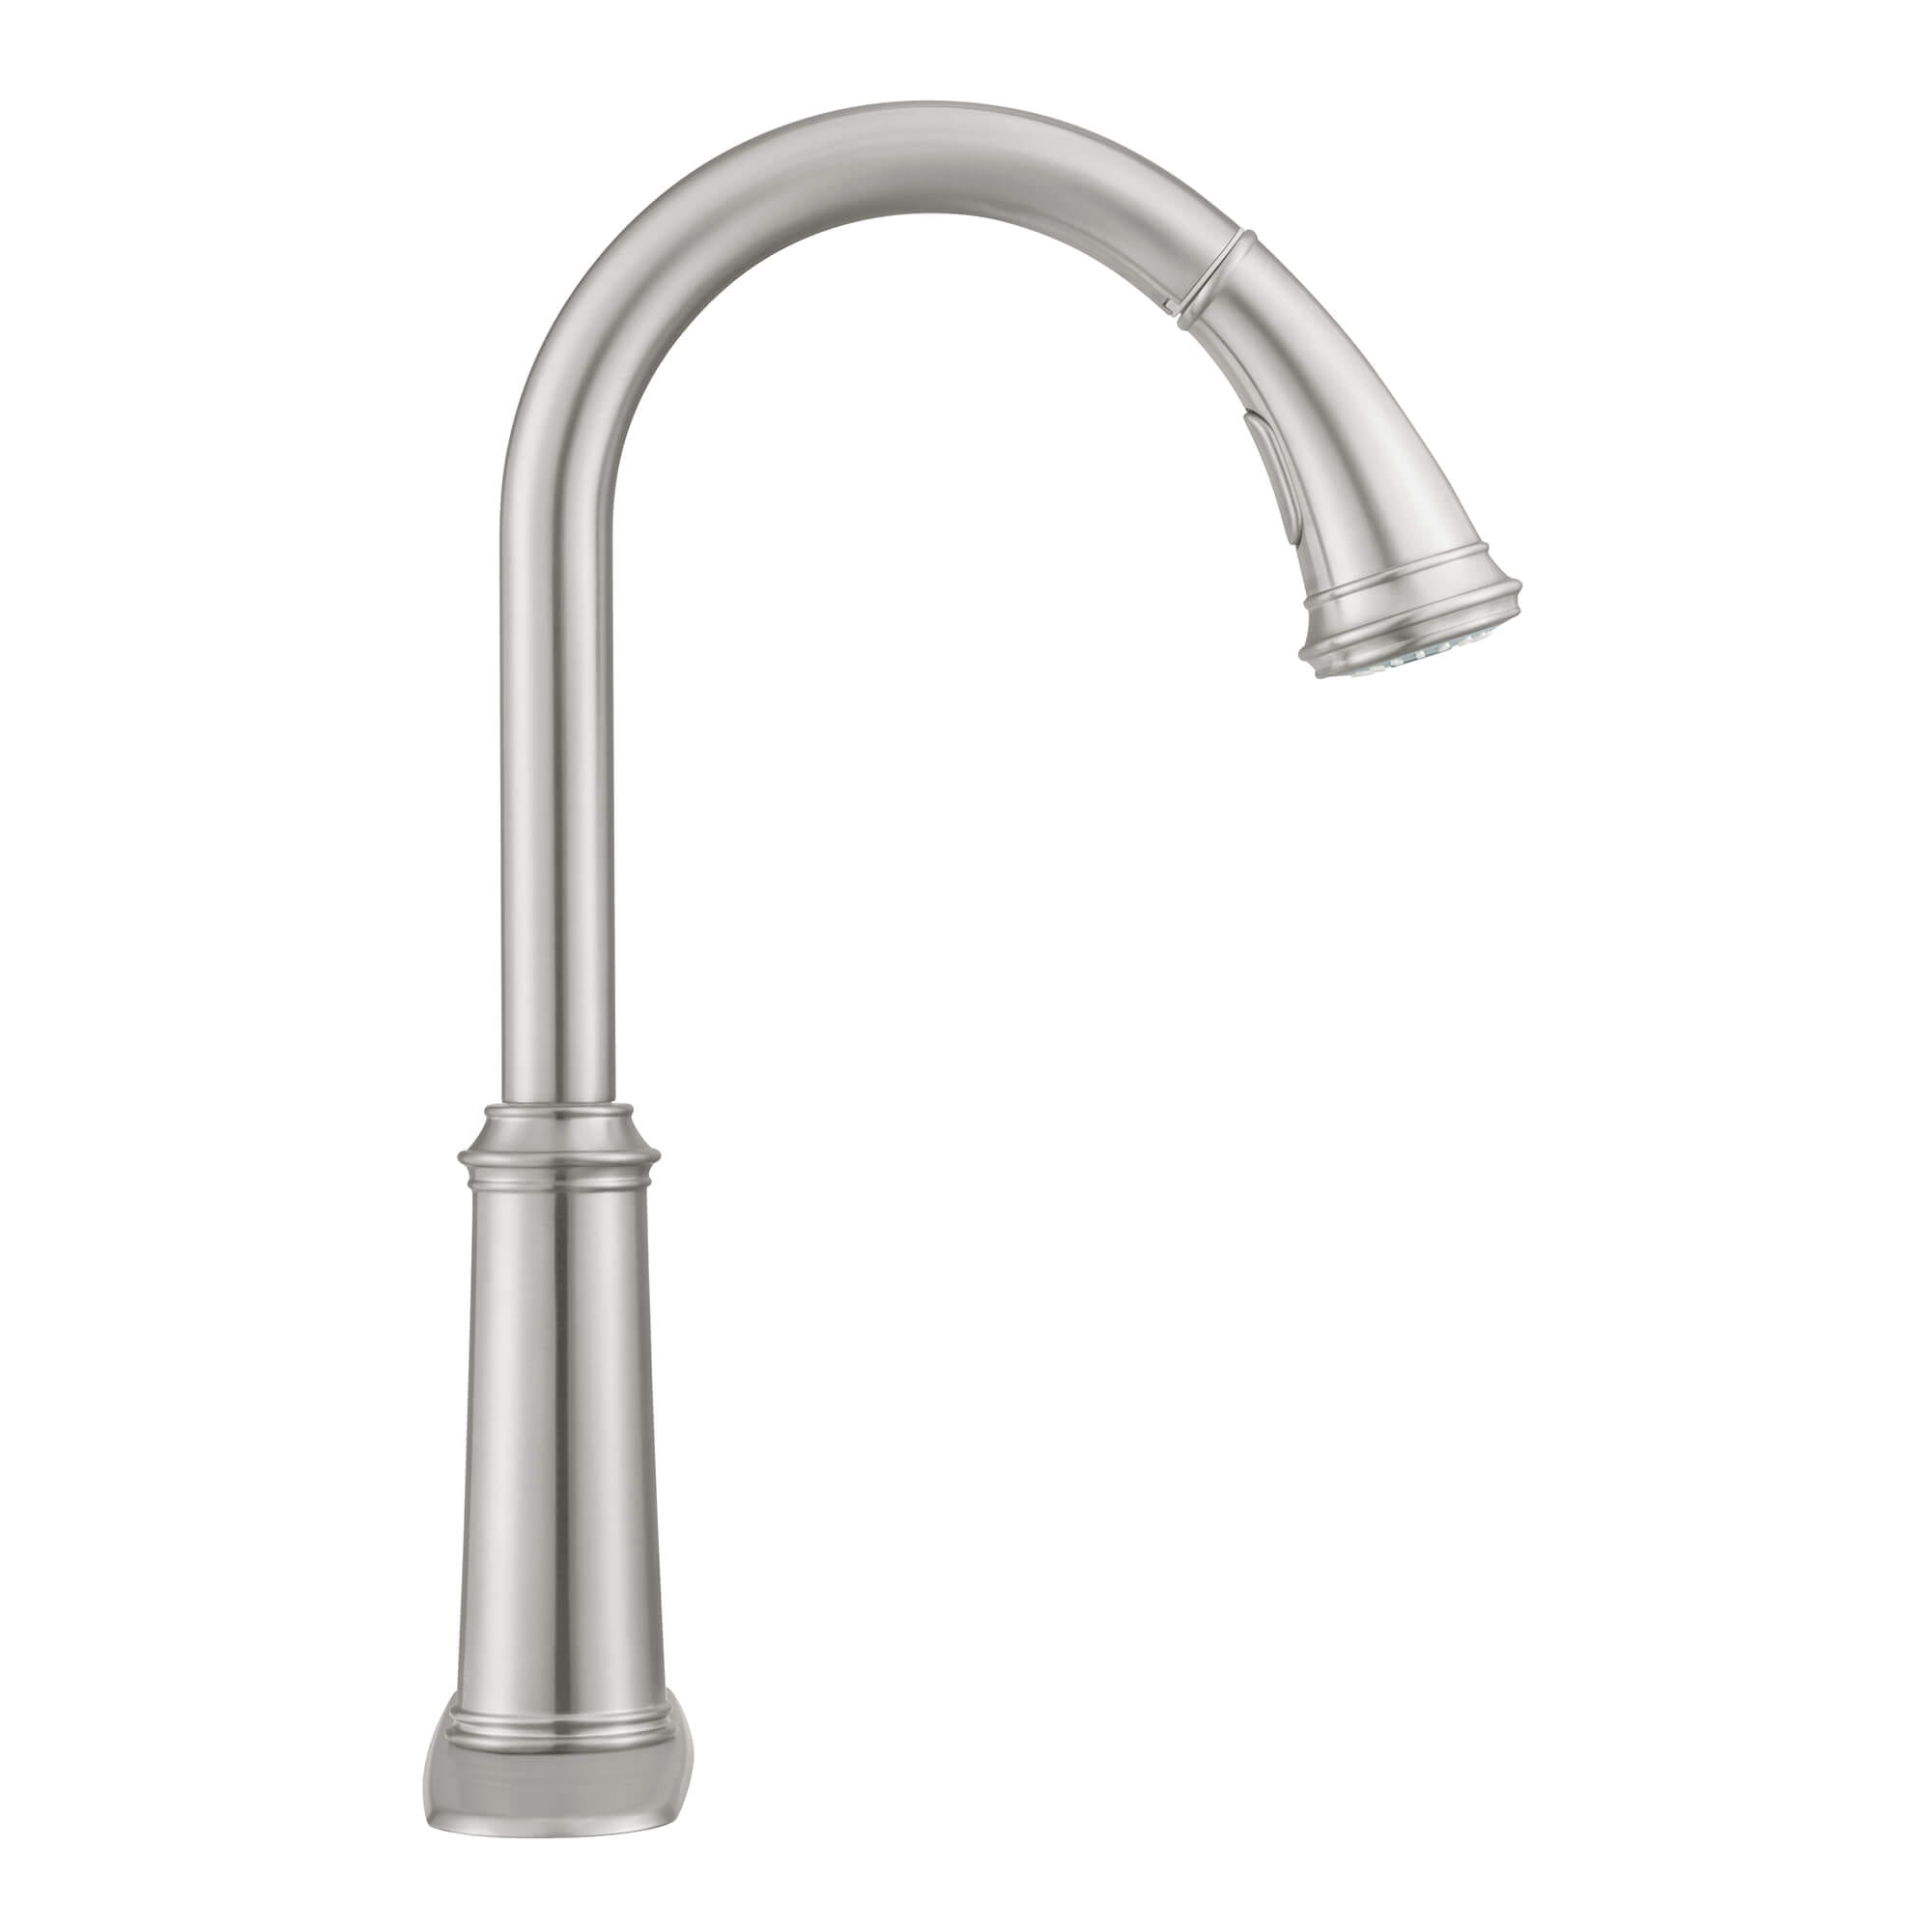 First Post Grohe Gloucester Cartridge Replacement Terry Love Plumbing Advice Remodel Diy Professional Forum